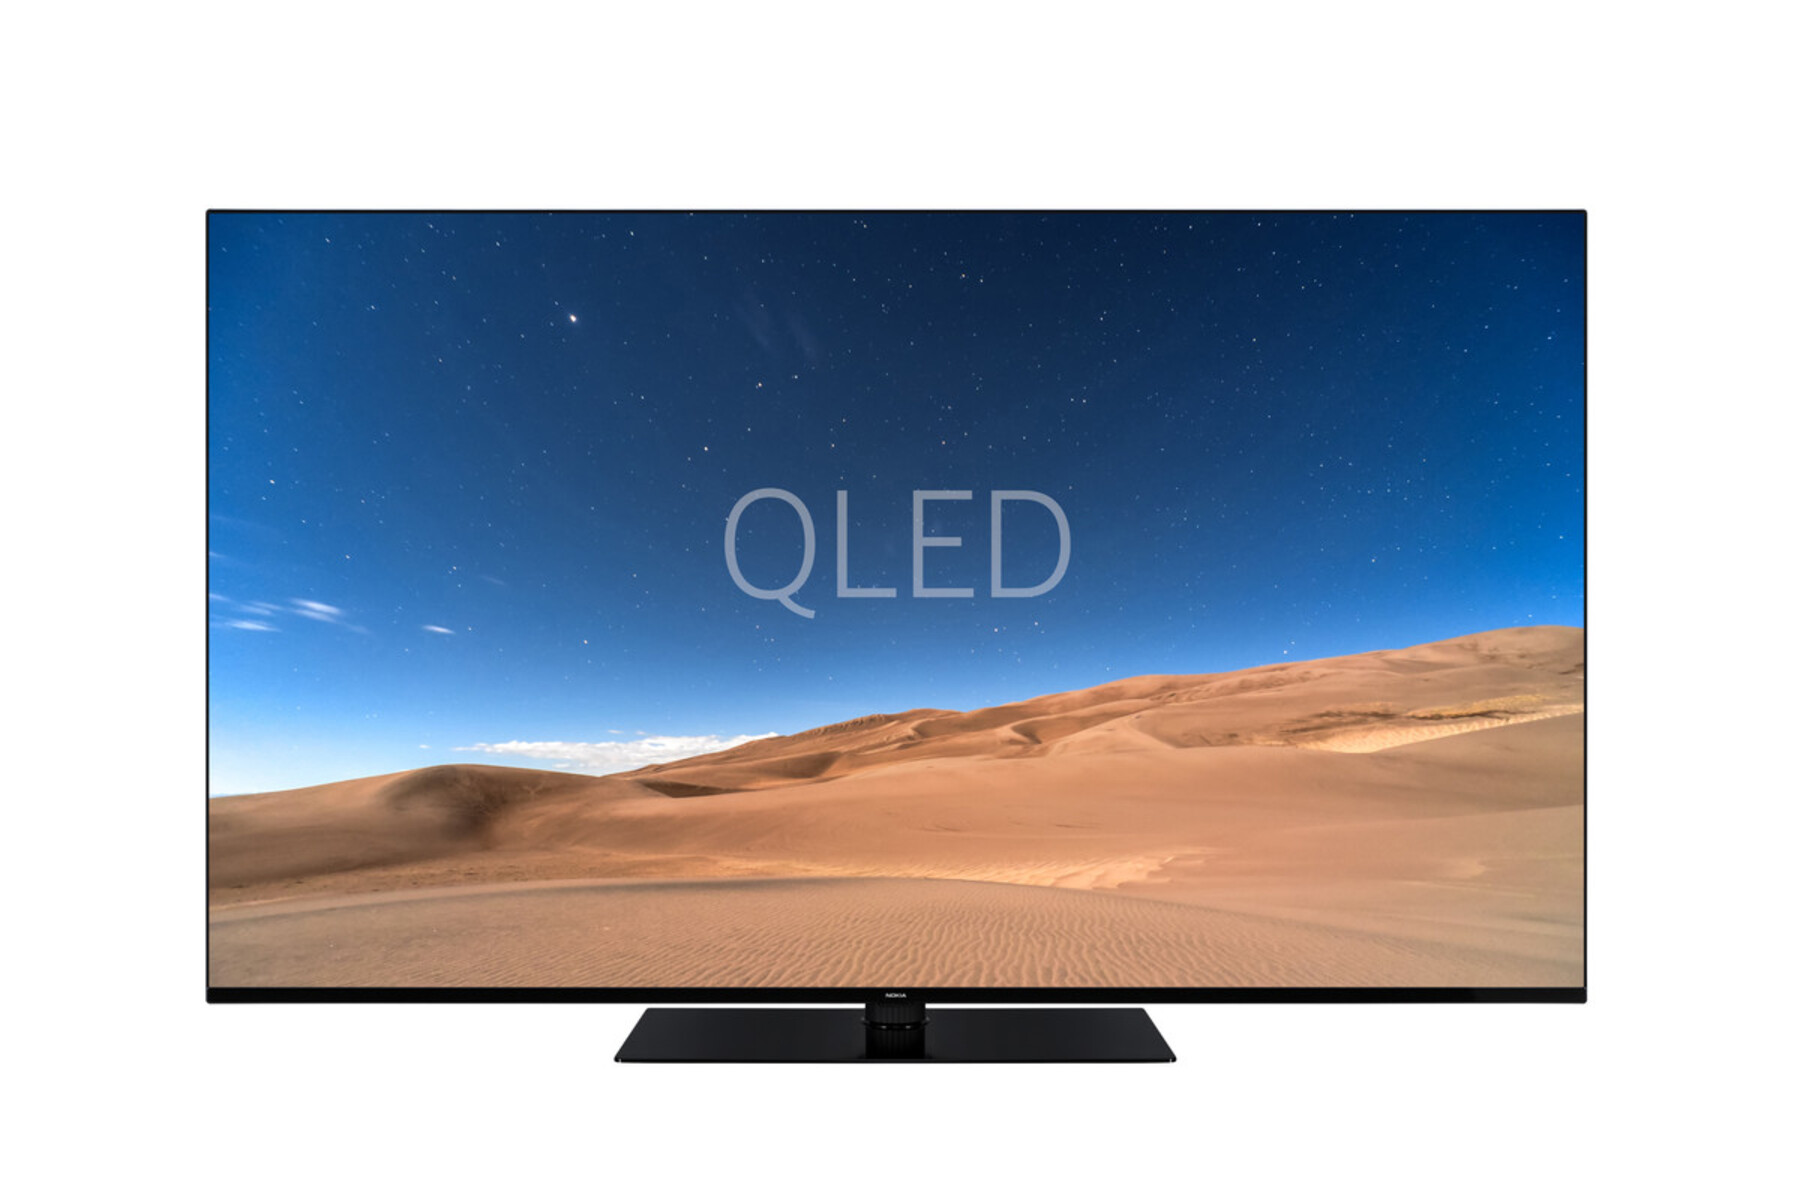 What Is The Refresh Rate Of A 65-Inch QLED TV